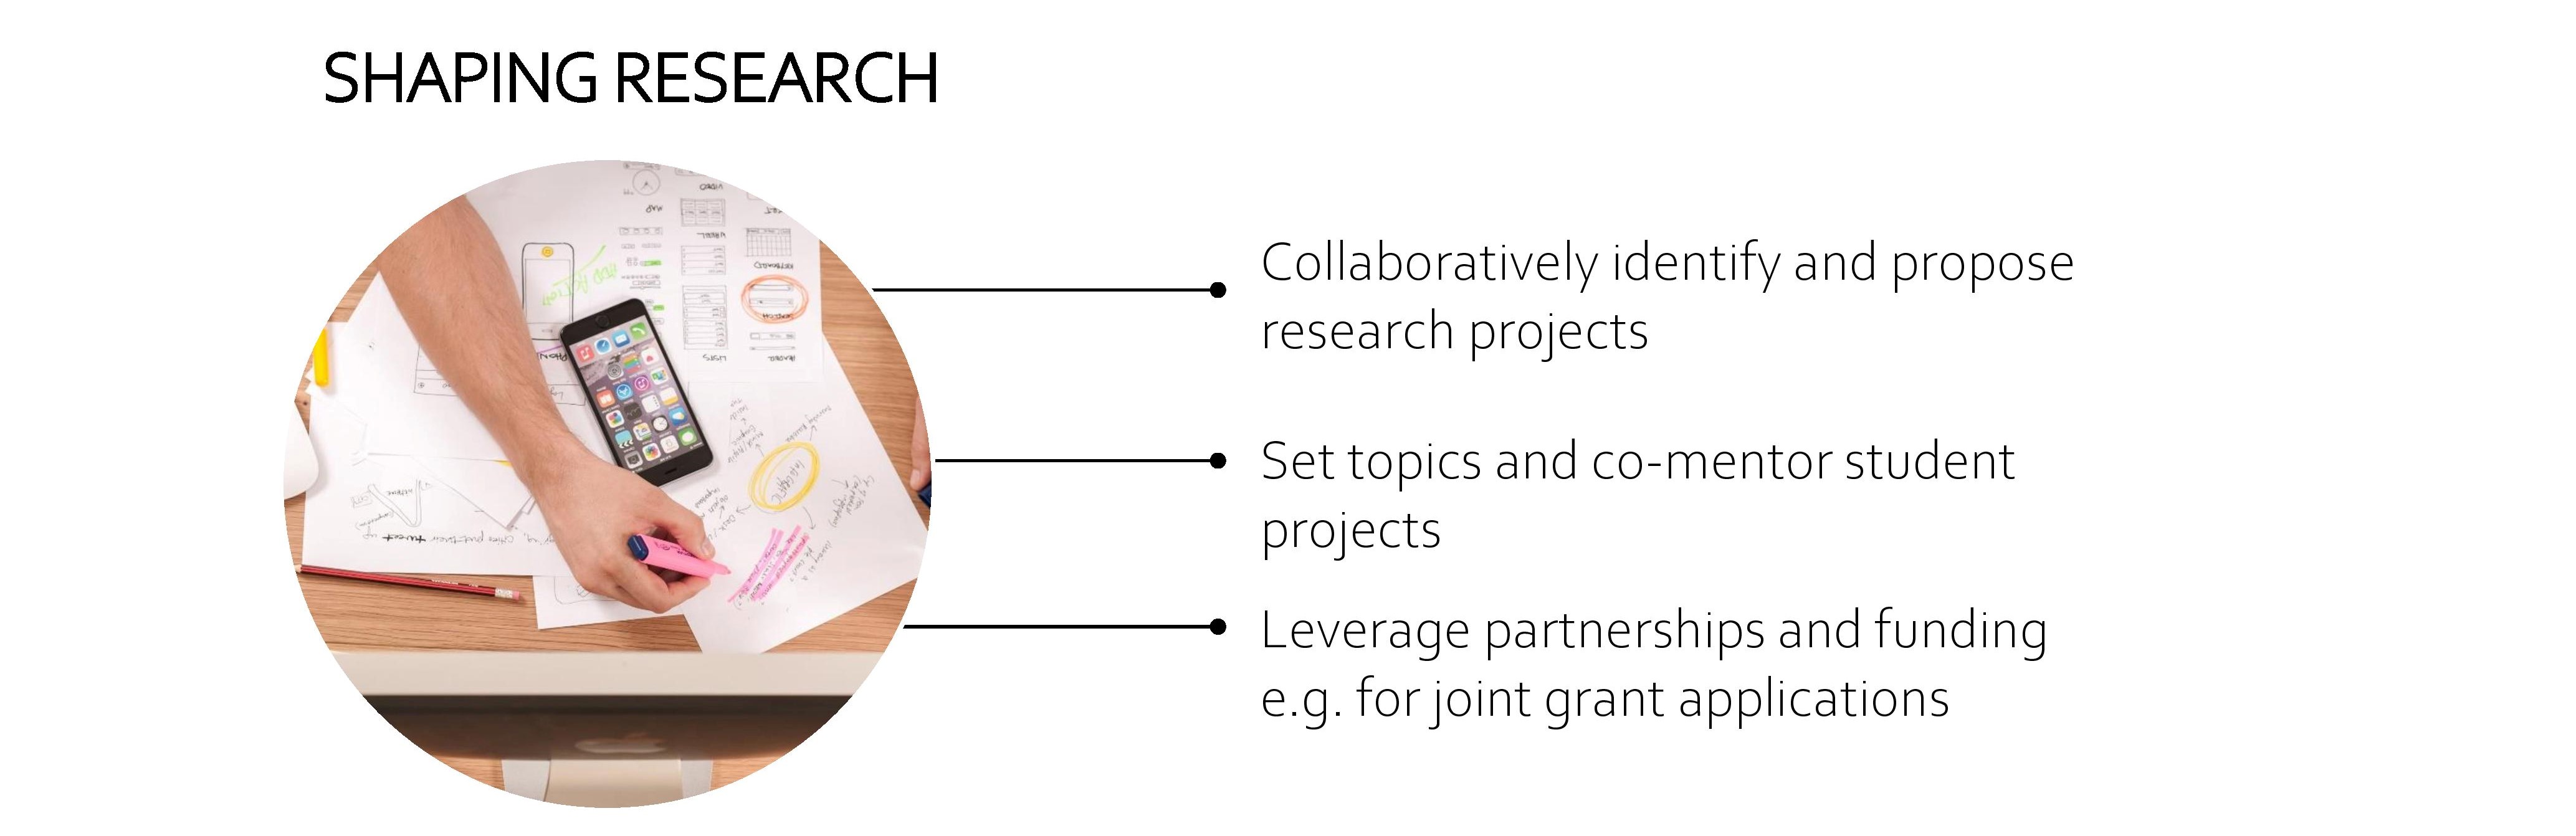 SHAPING RESEARCH. Collaboratively identify and propose research projects. Set topics and co-mentor student projects. Leverage partnerships and funding e.g. for joint grant applications